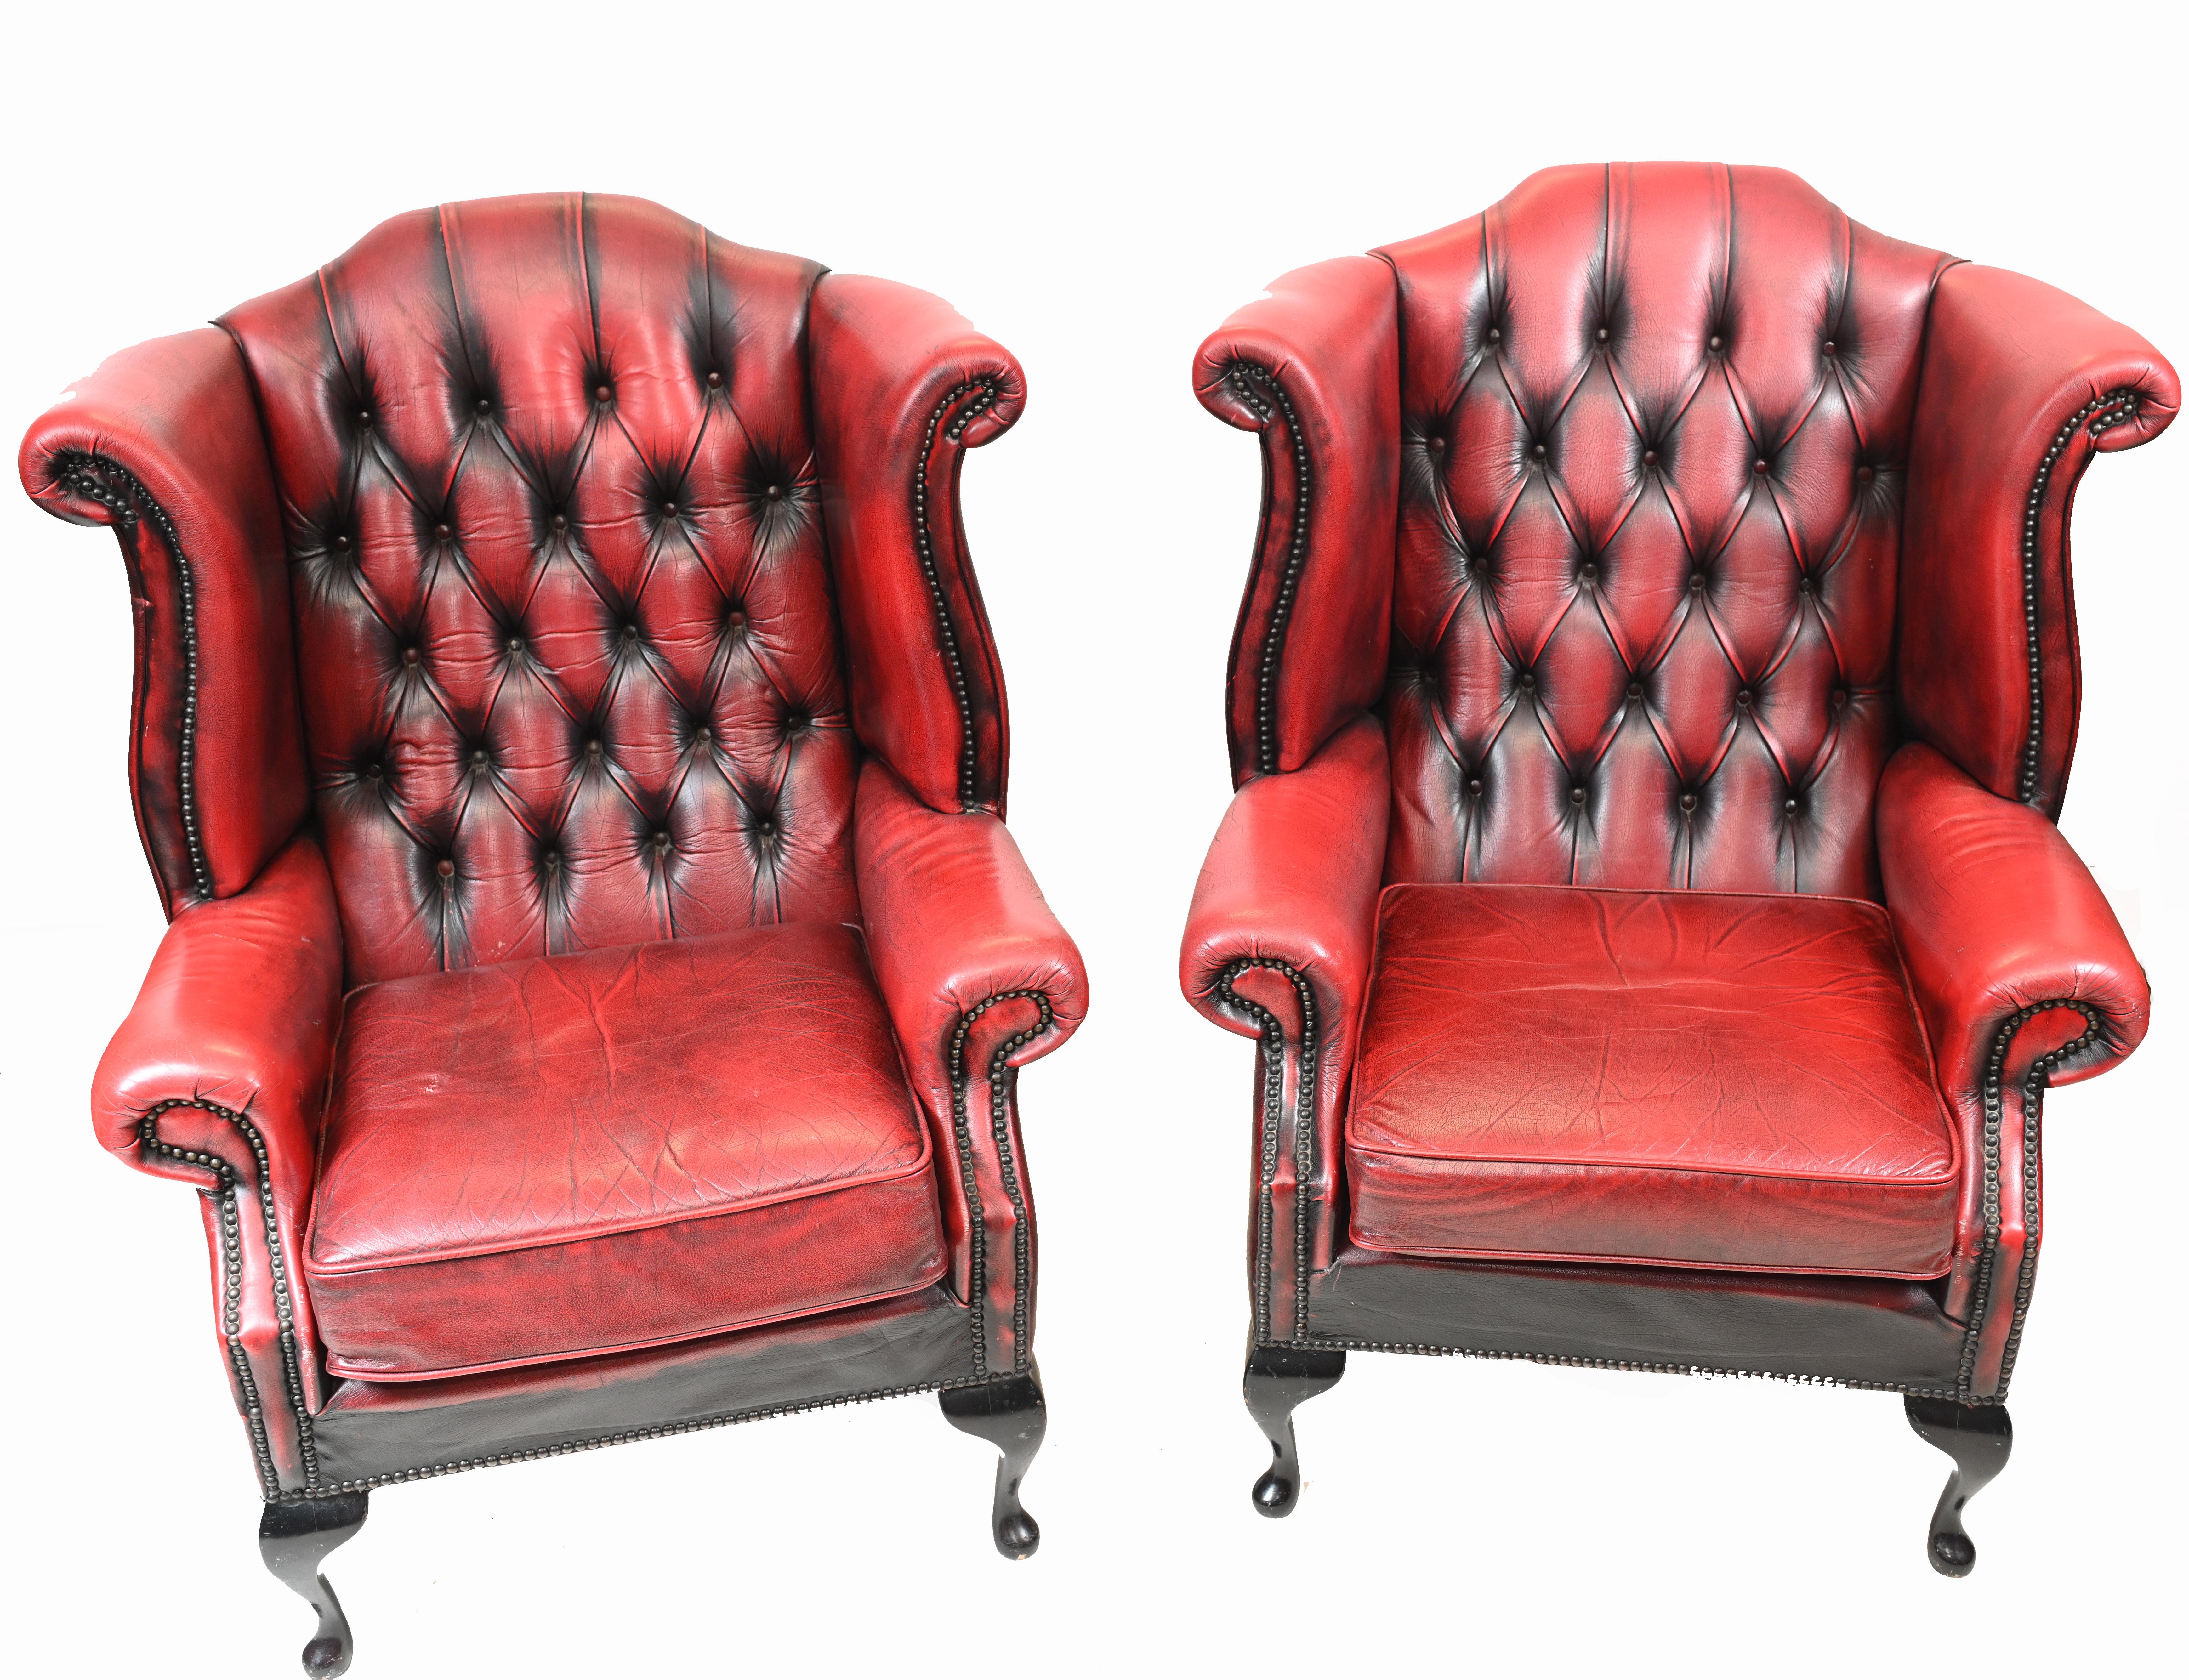 Elegant pair of leather Chesterfield wingback arm chairs
Classic deep button finish to the back 
Very comfortable to sit in, you can really sink back into these
Red leather with antiqued finish
Bought from a dealer on Church Street London